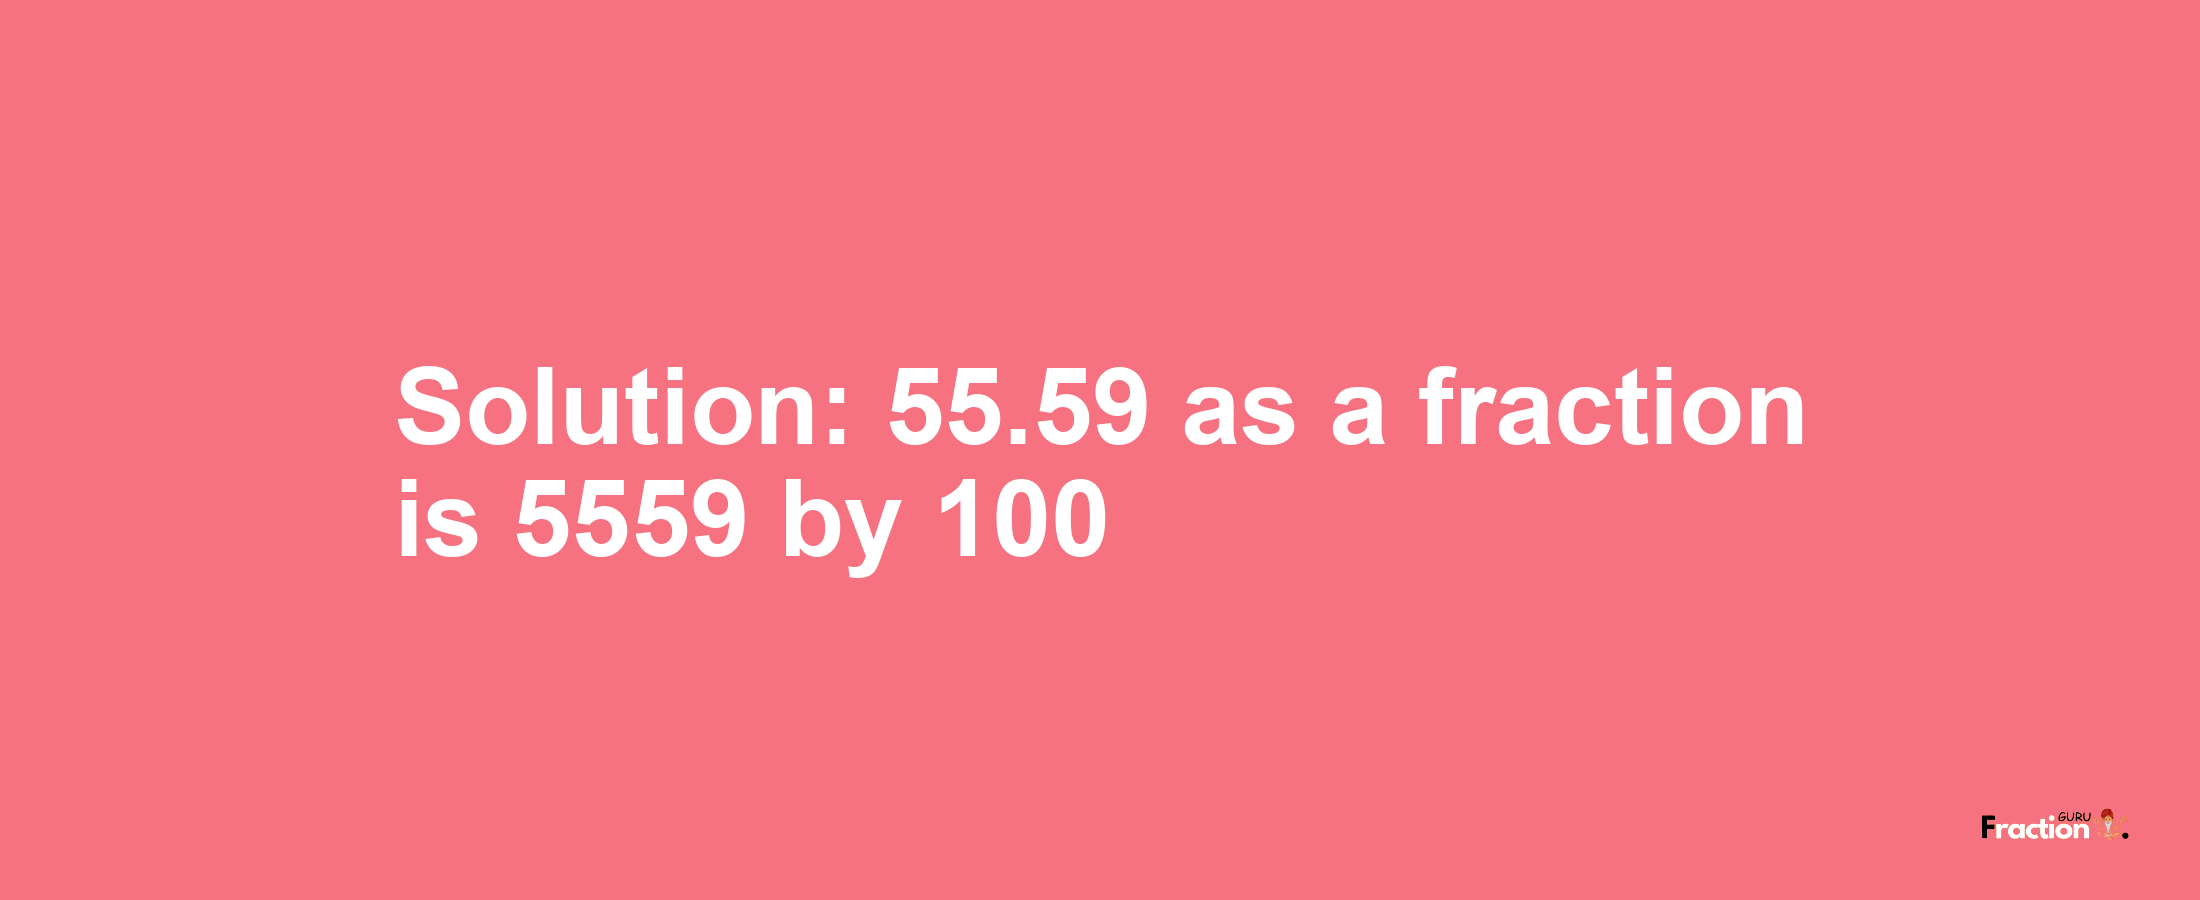 Solution:55.59 as a fraction is 5559/100